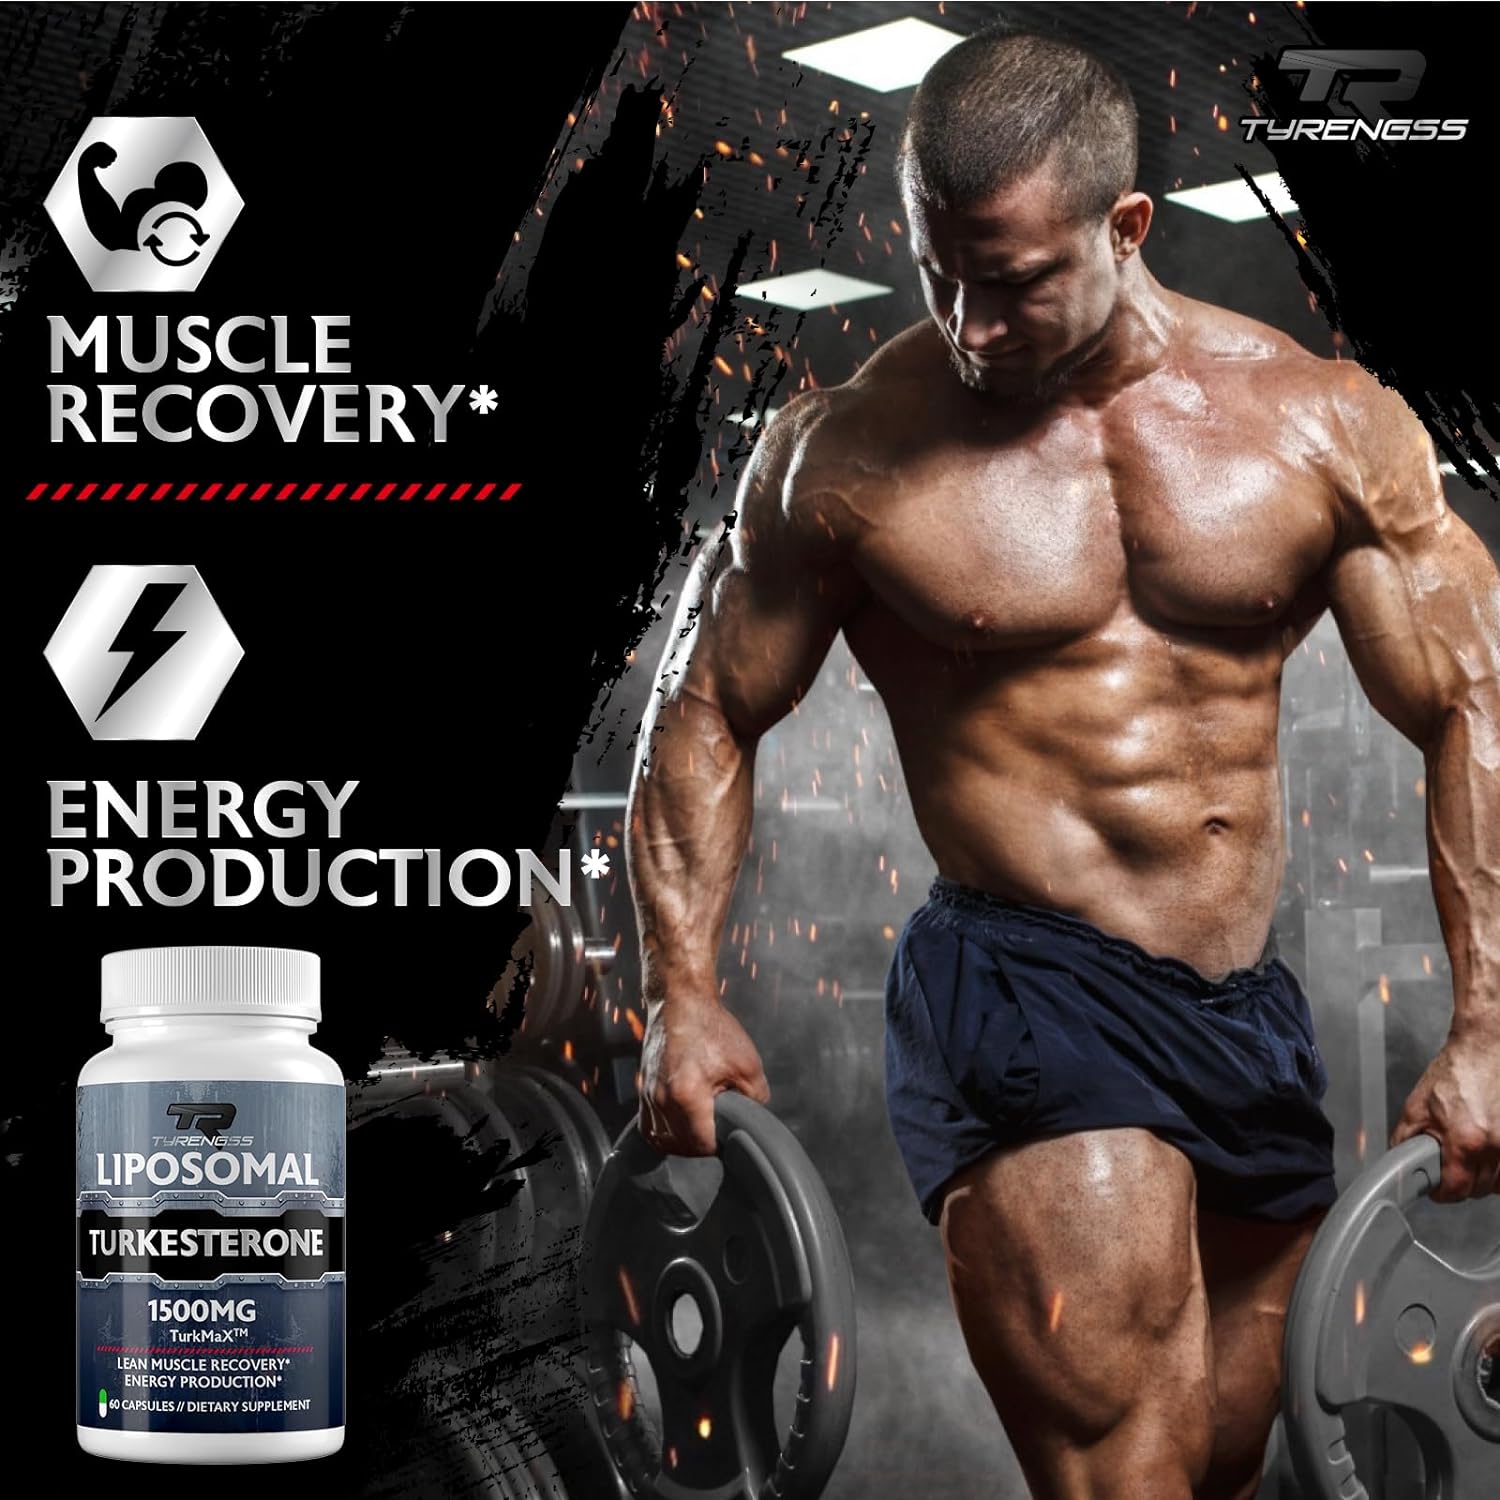 Muscle recovery and lean muscle growth